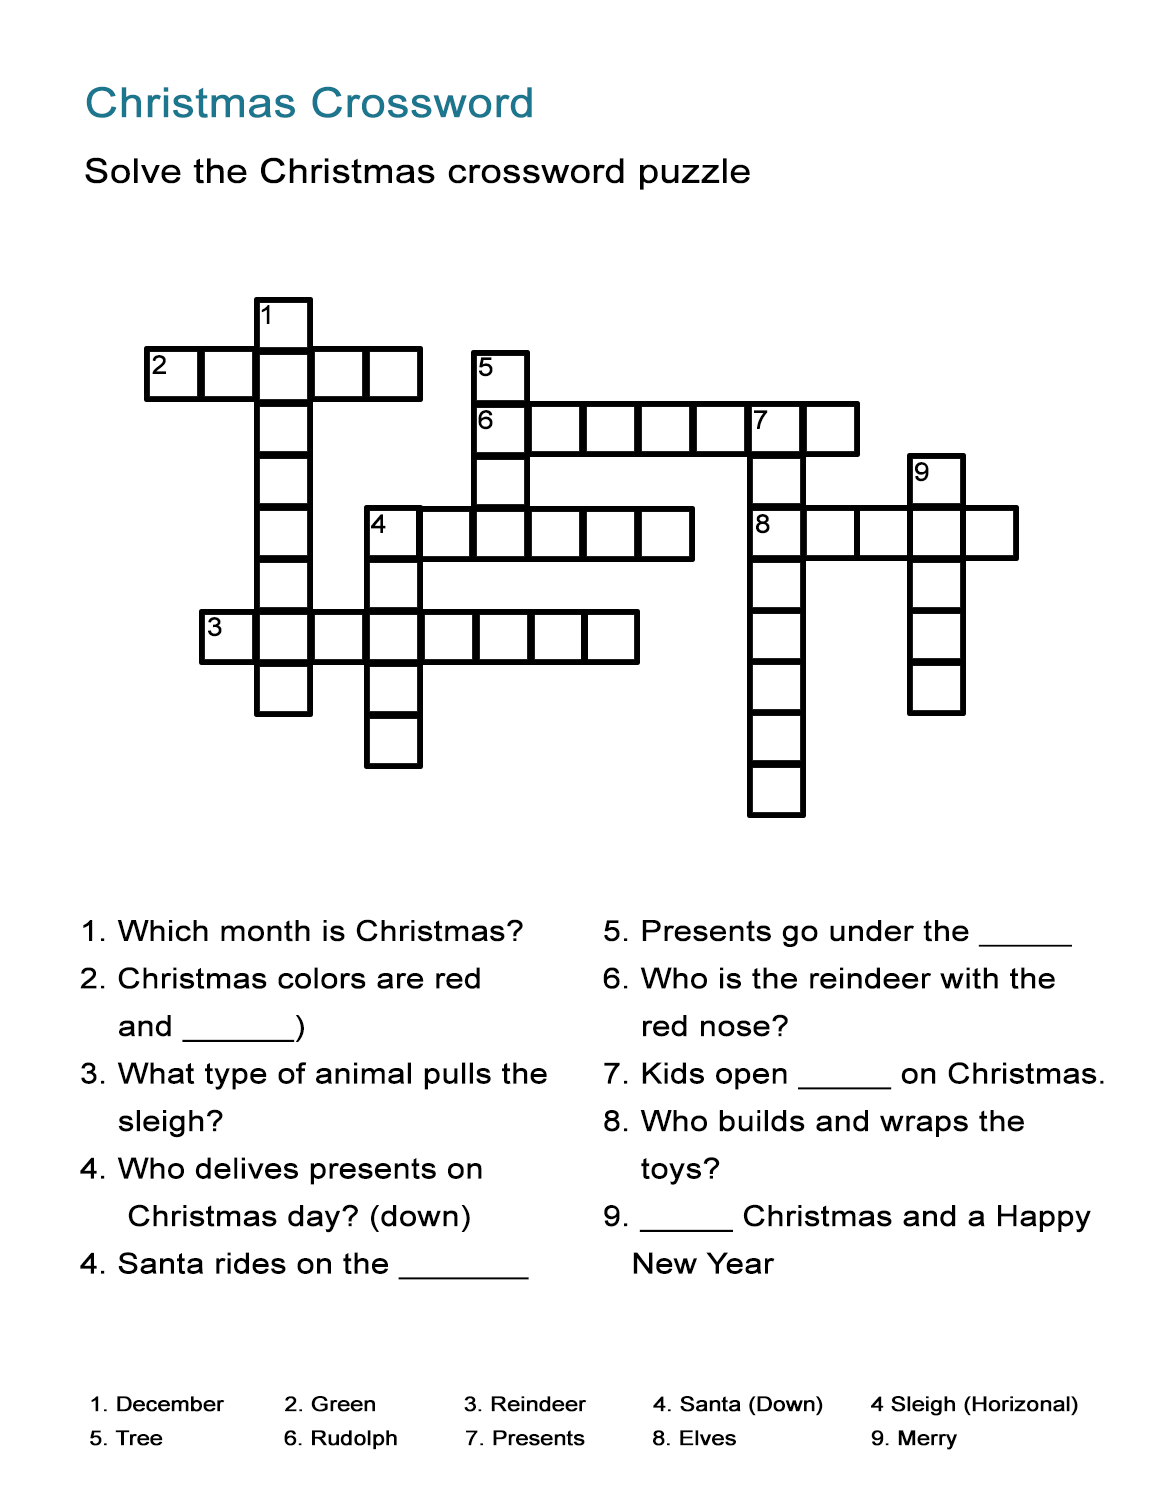 Charger Christmas Crossword Puzzle Answers. Christmas Crossword - Free Printable Christmas Crossword Puzzles For Adults